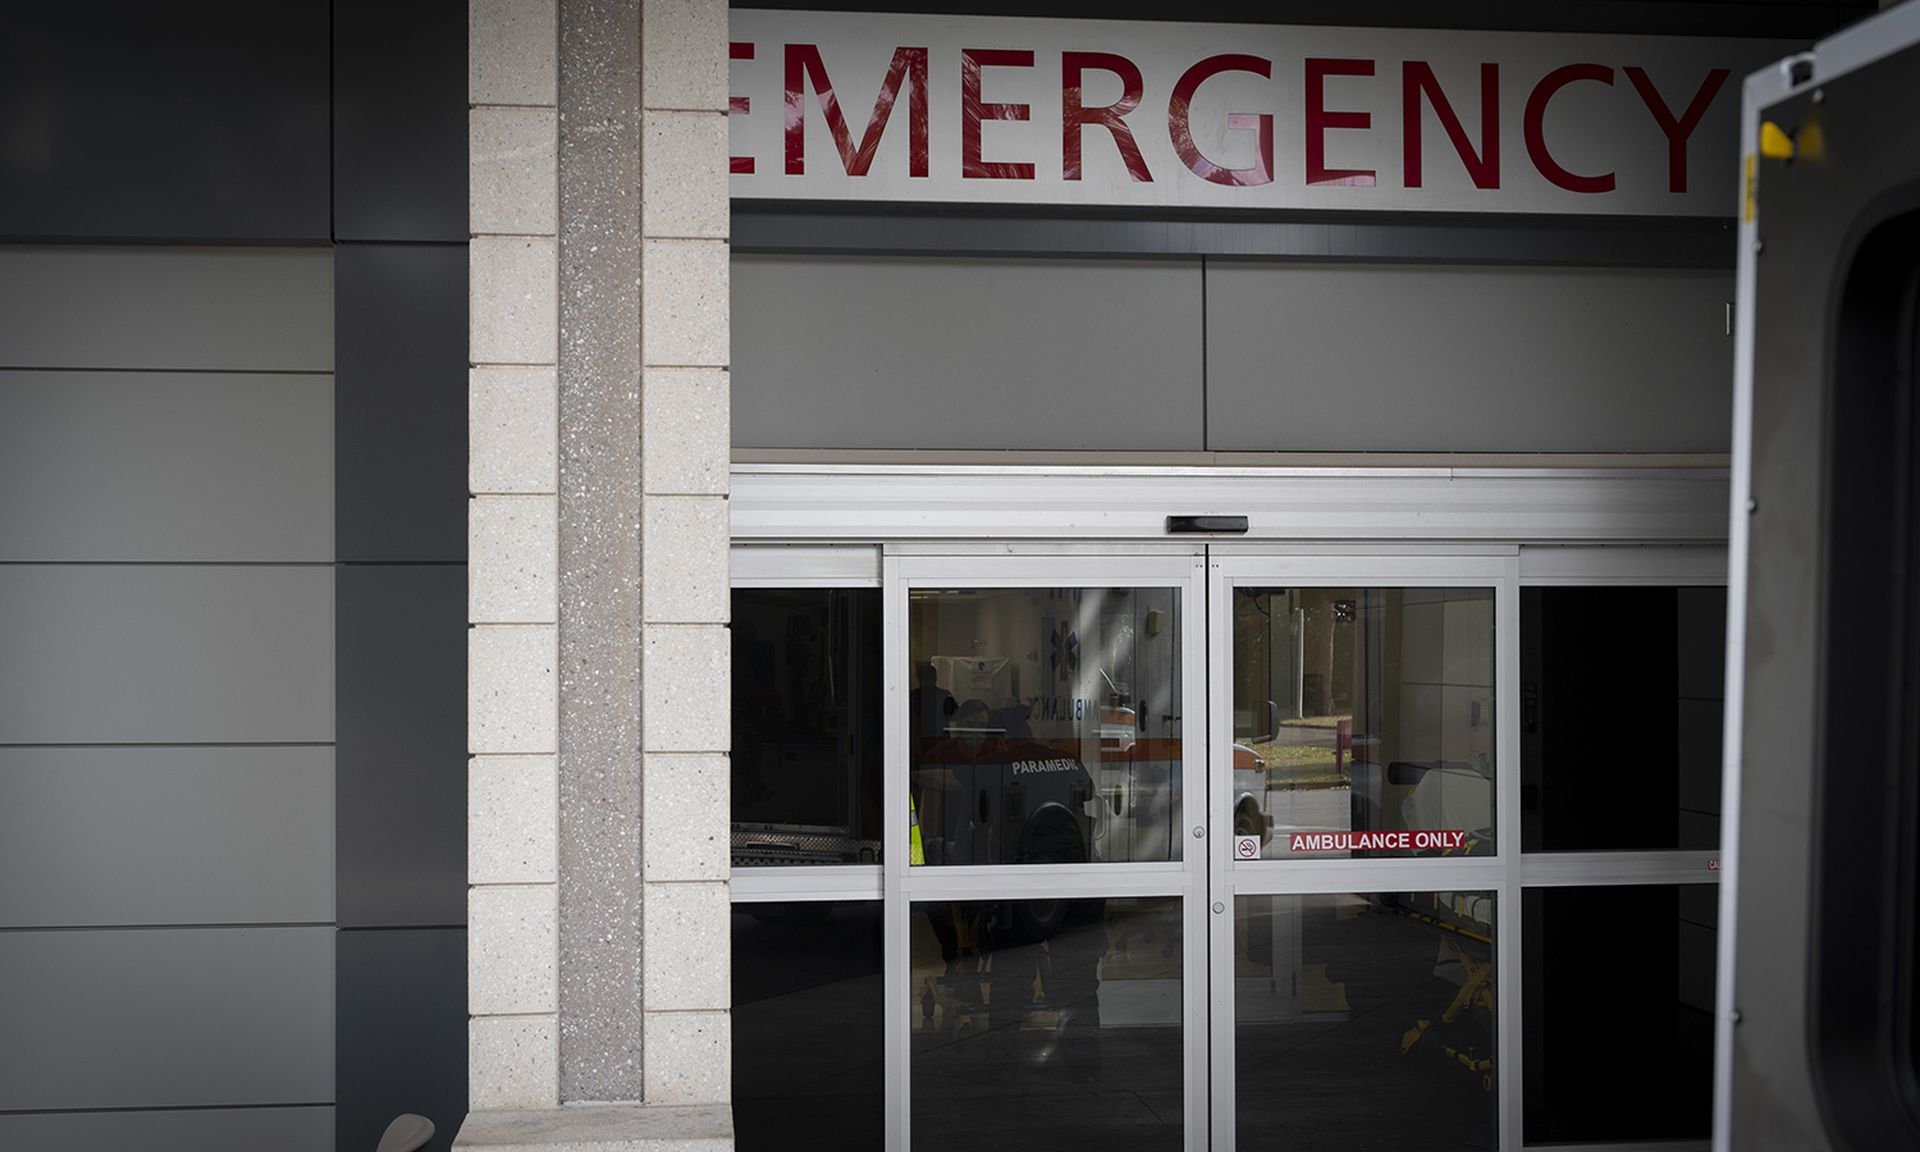 The entrance to a hospital emergency room is seen